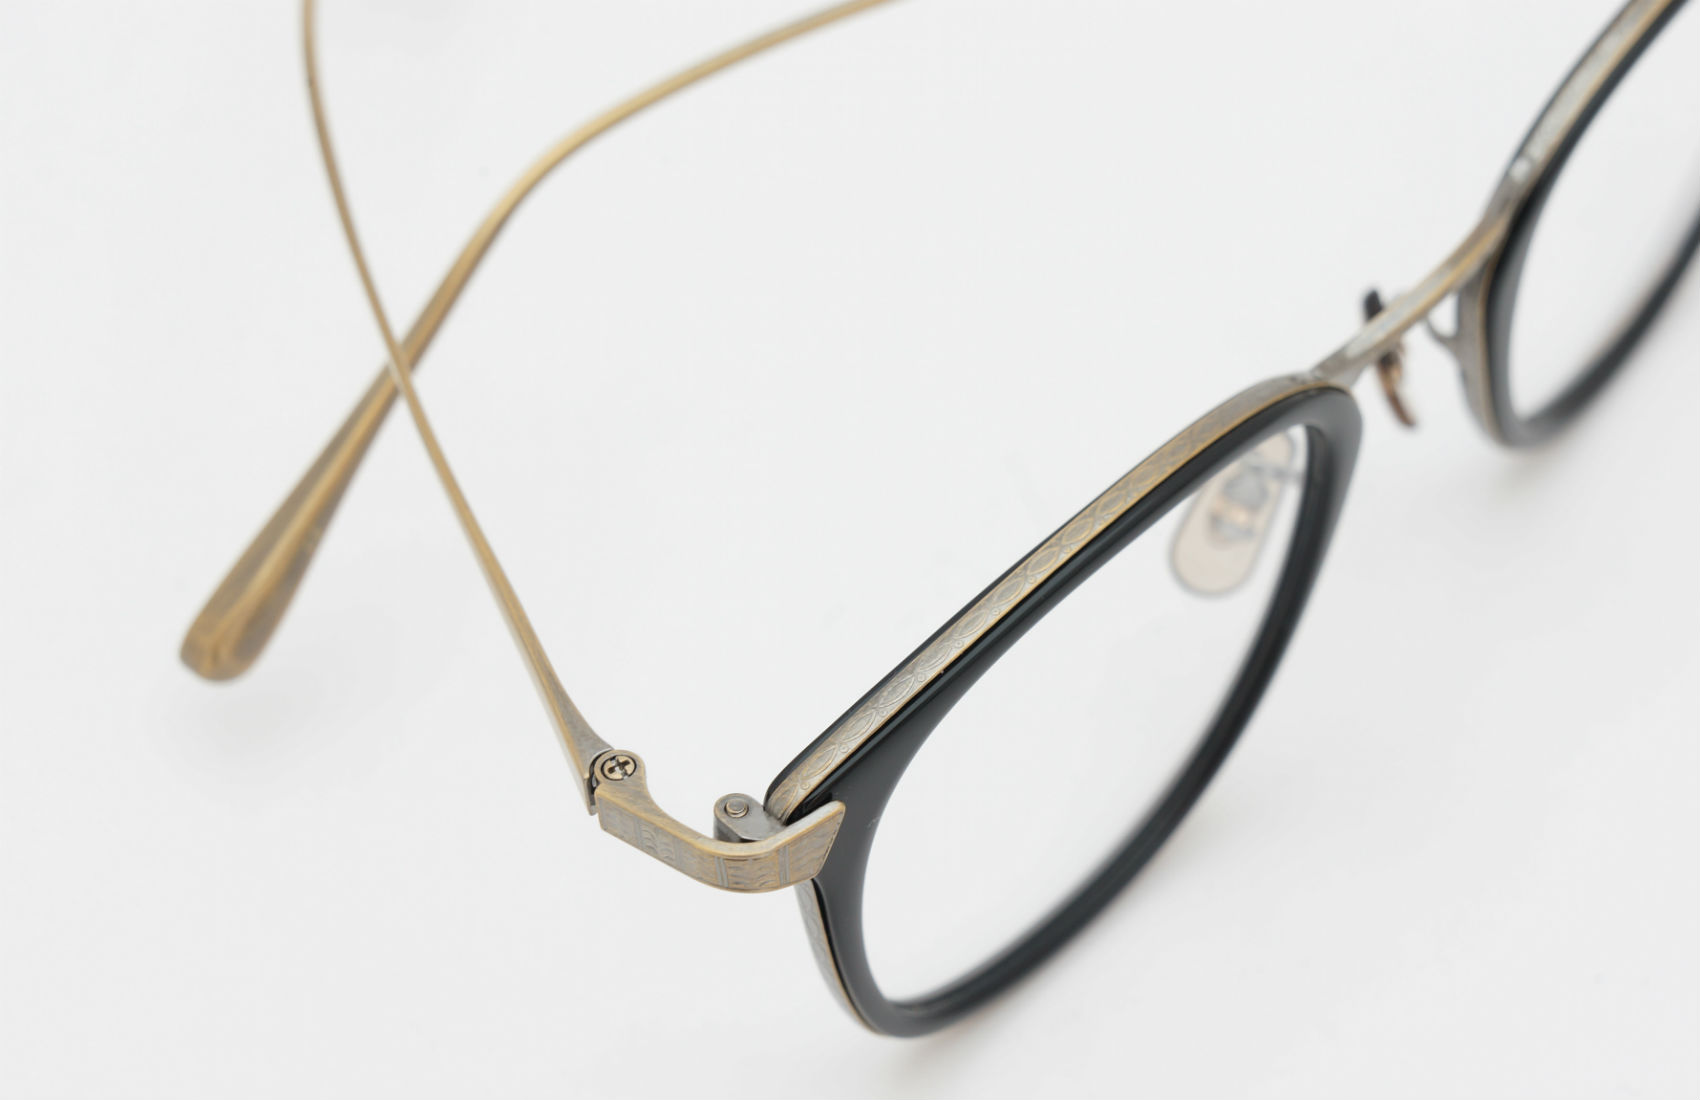 OLIVER PEOPLES Louden